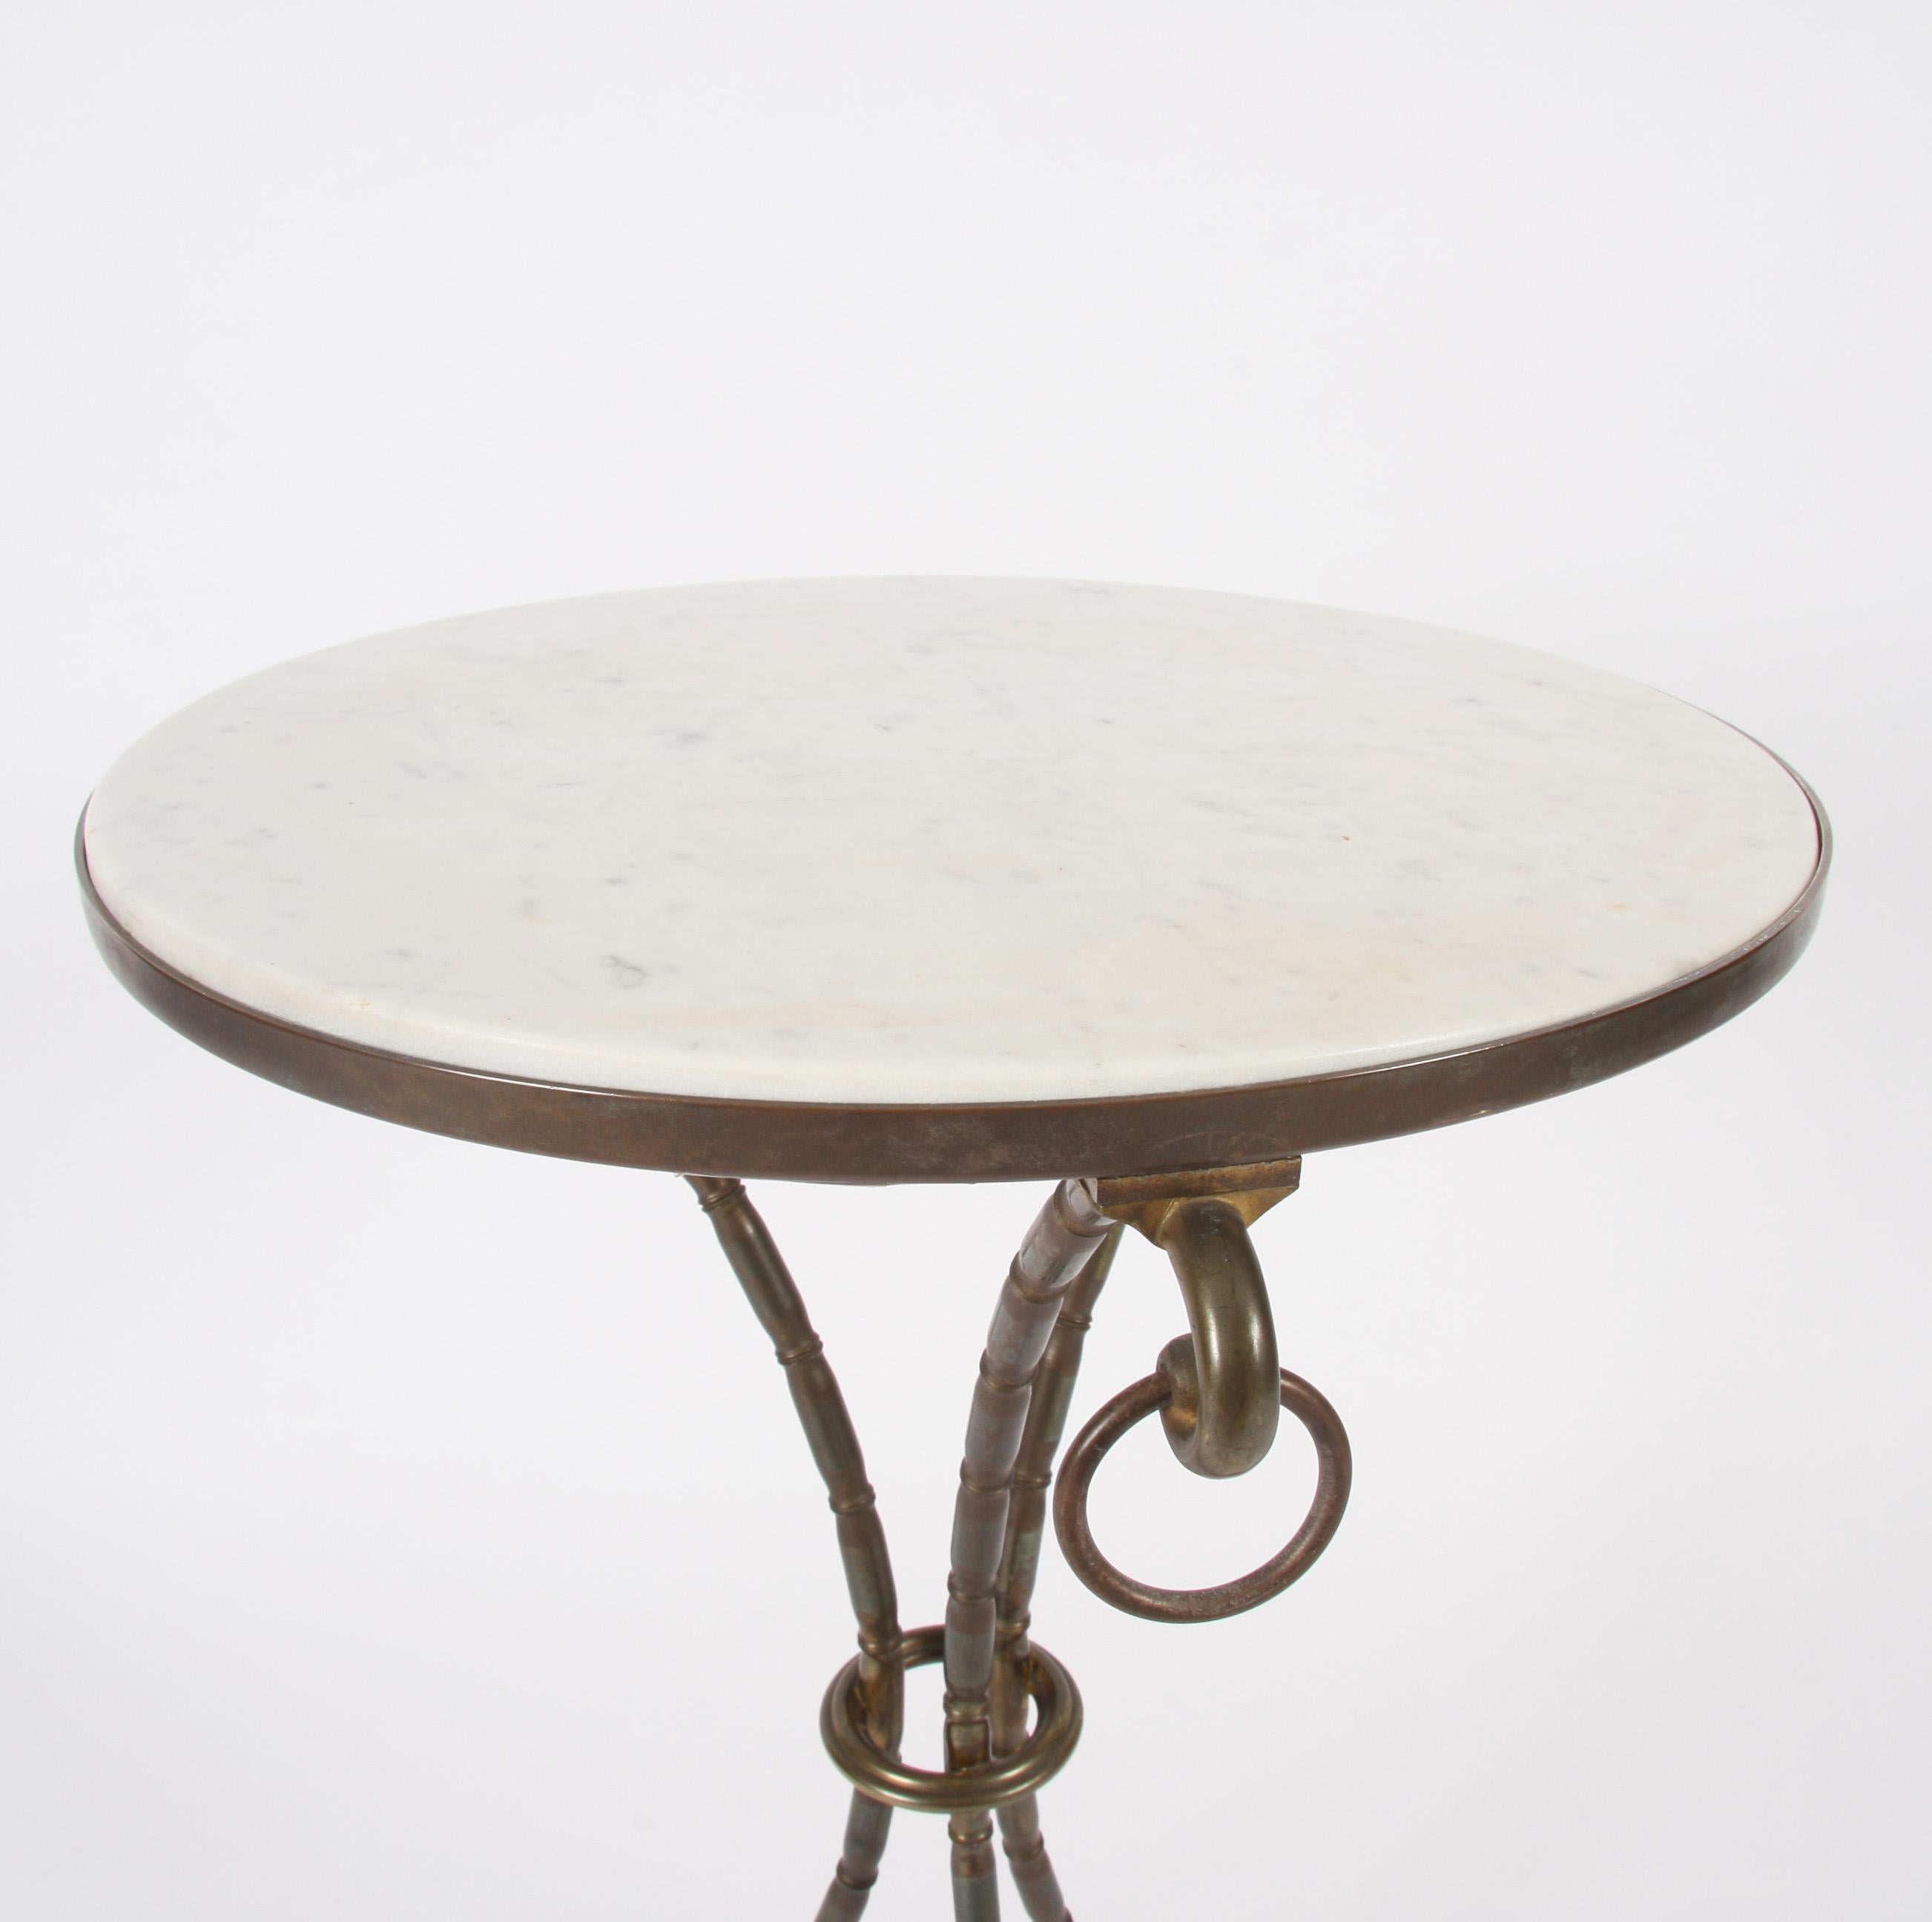 This stunning steel and marble side table dates back to mid-20th century, France.